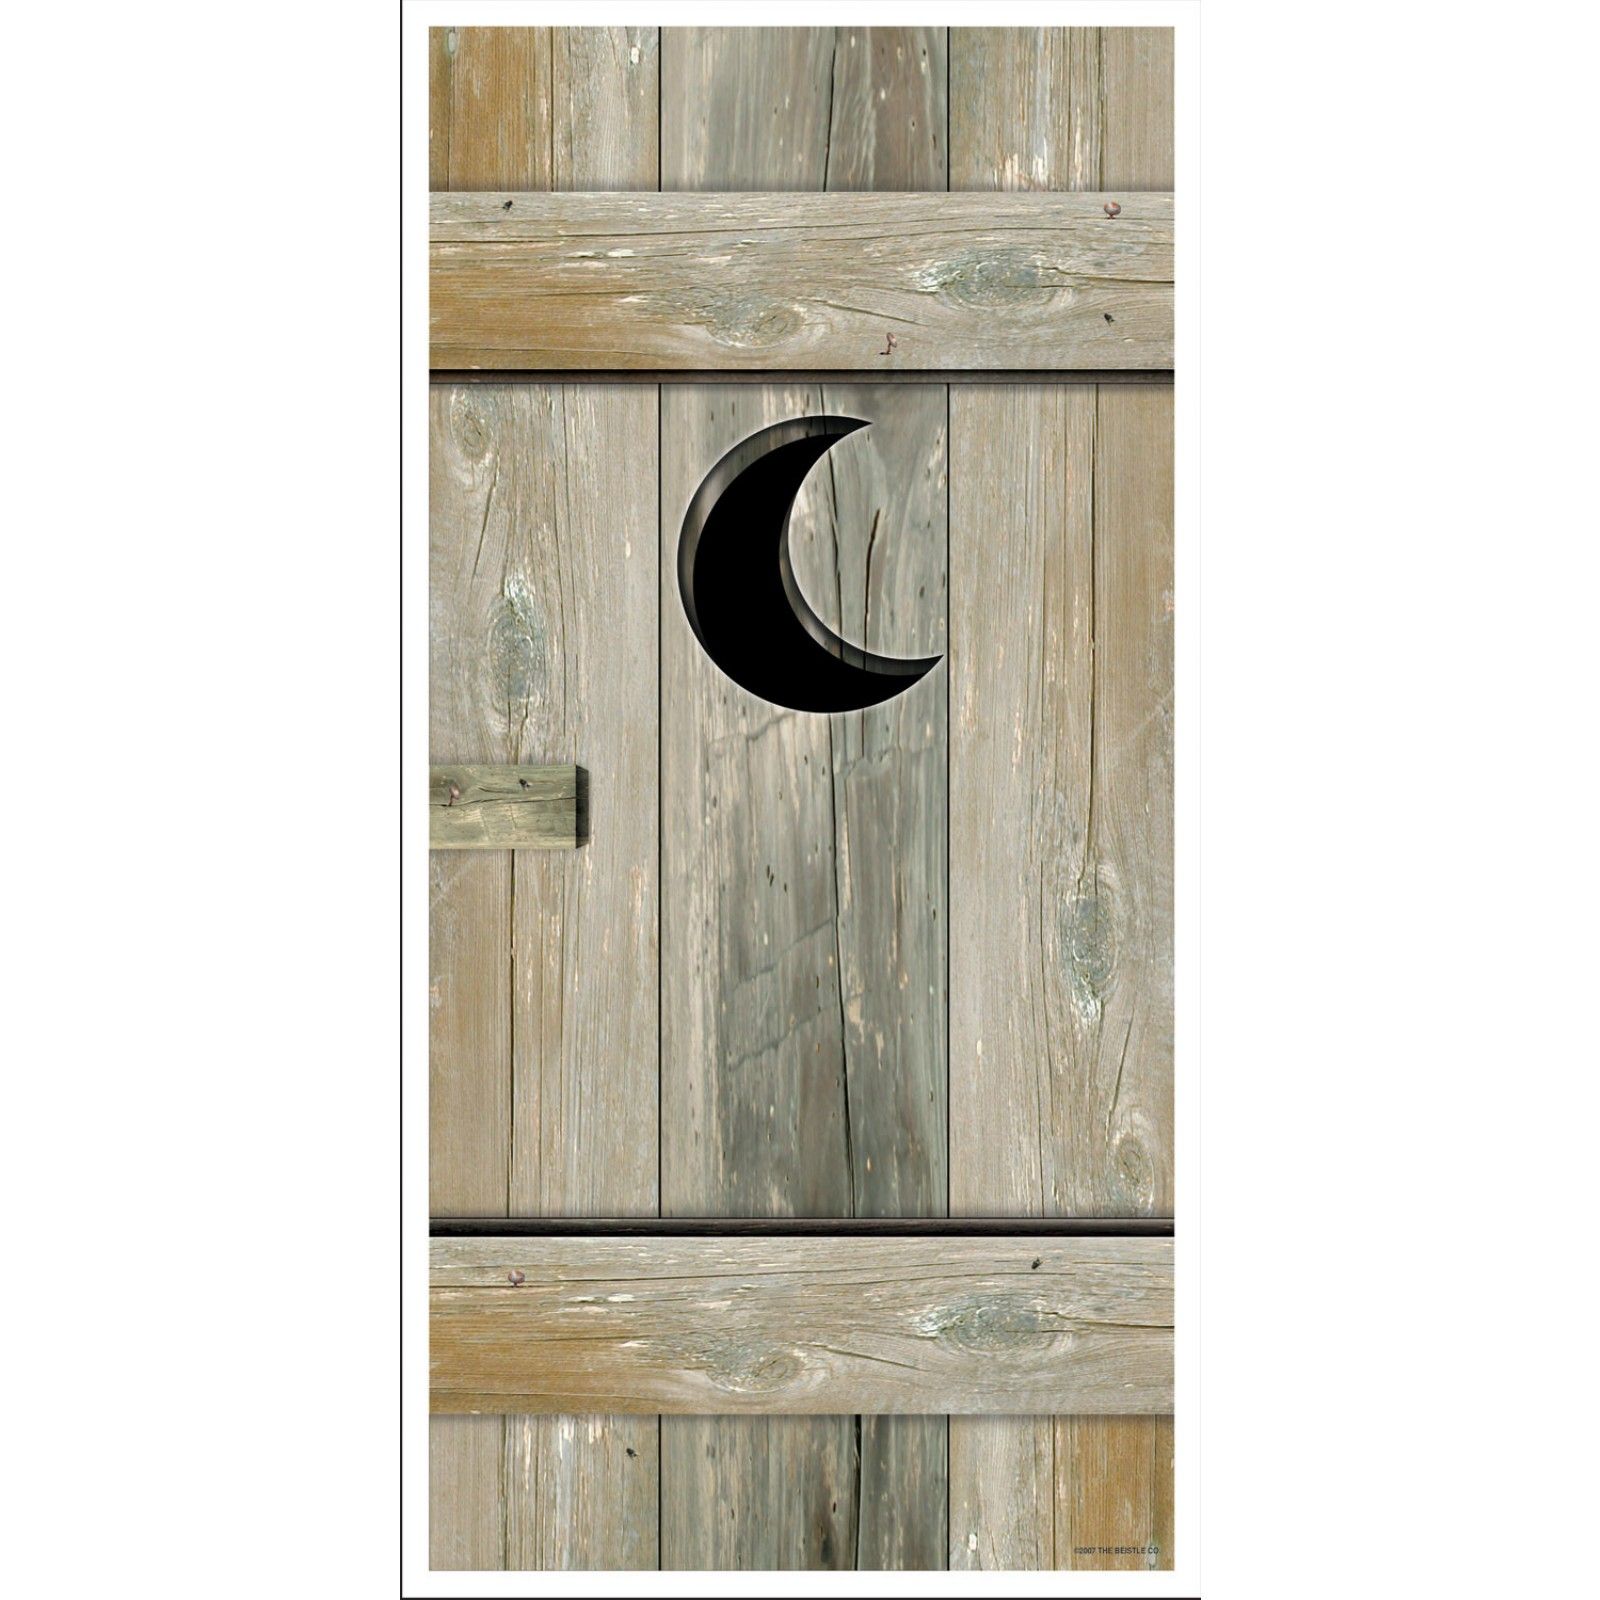 5' Outhouse Door Cover | Birthdays, Mystery parties and Birthday ...